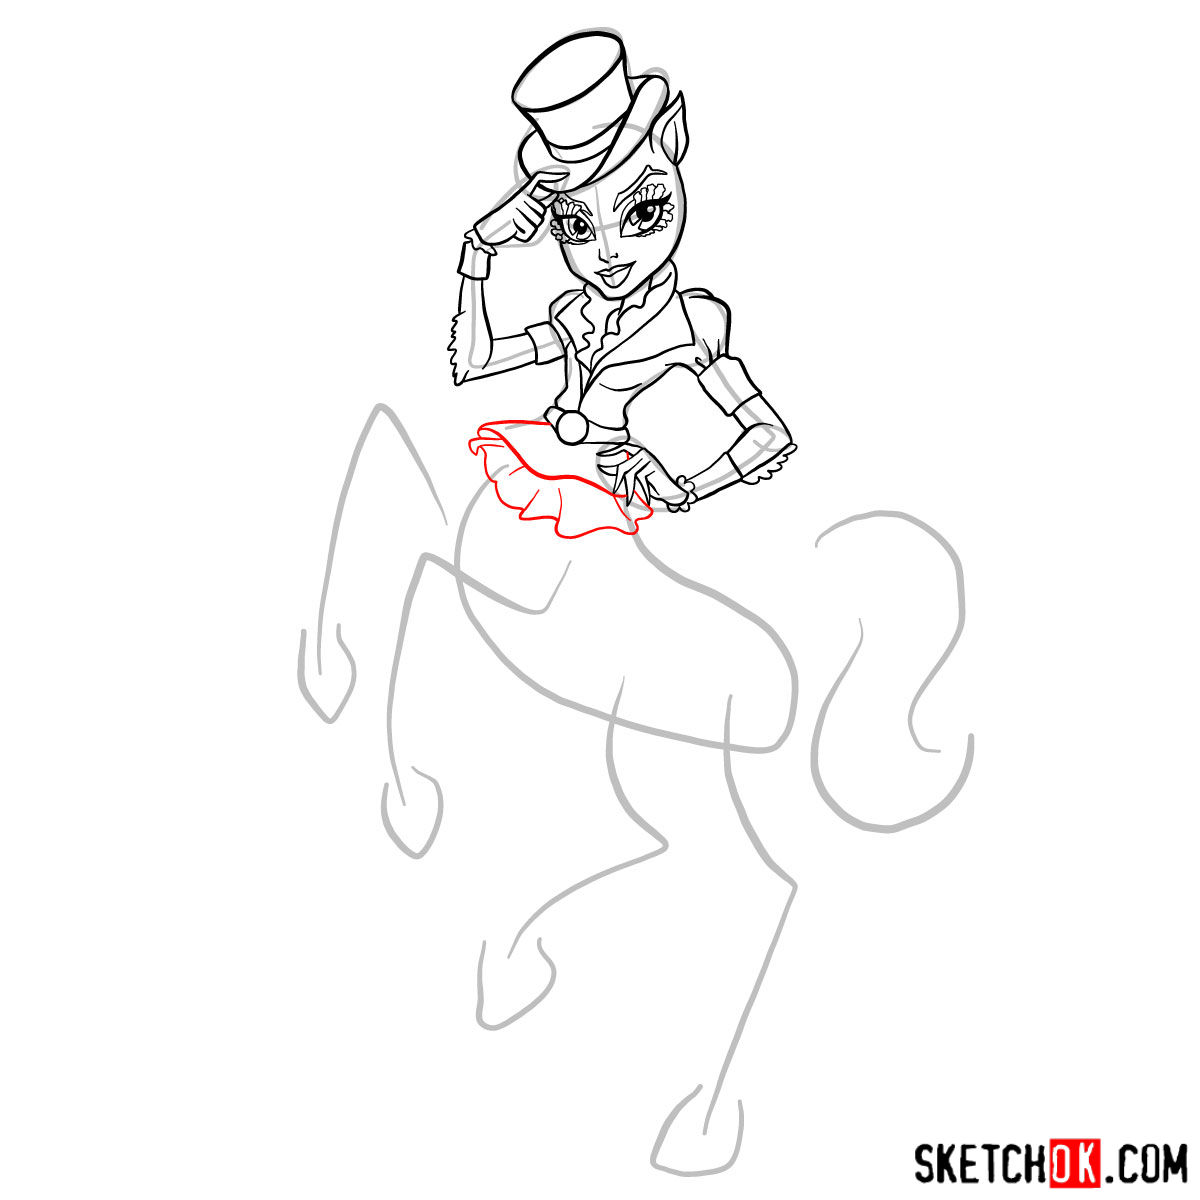 How to draw Avea Trotter - step 10